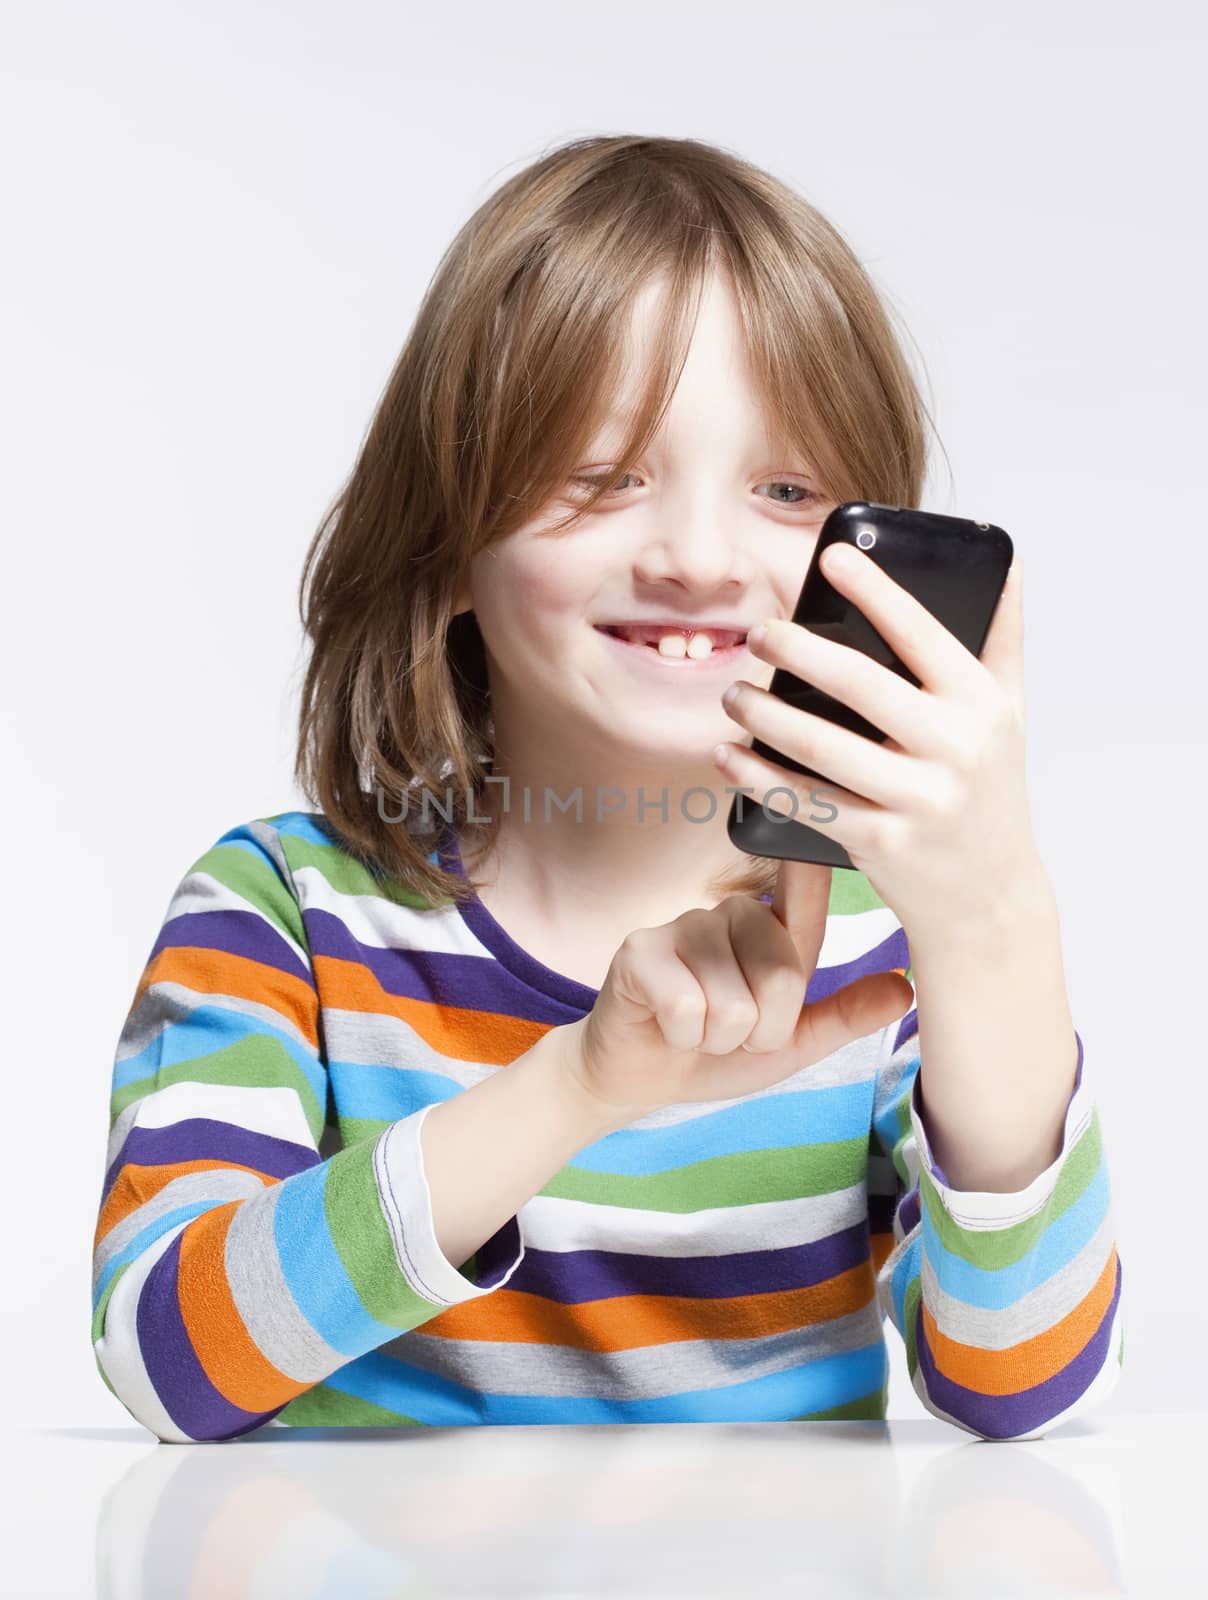 Boy with Blond Hair Reading Text Message on Mobile Phone